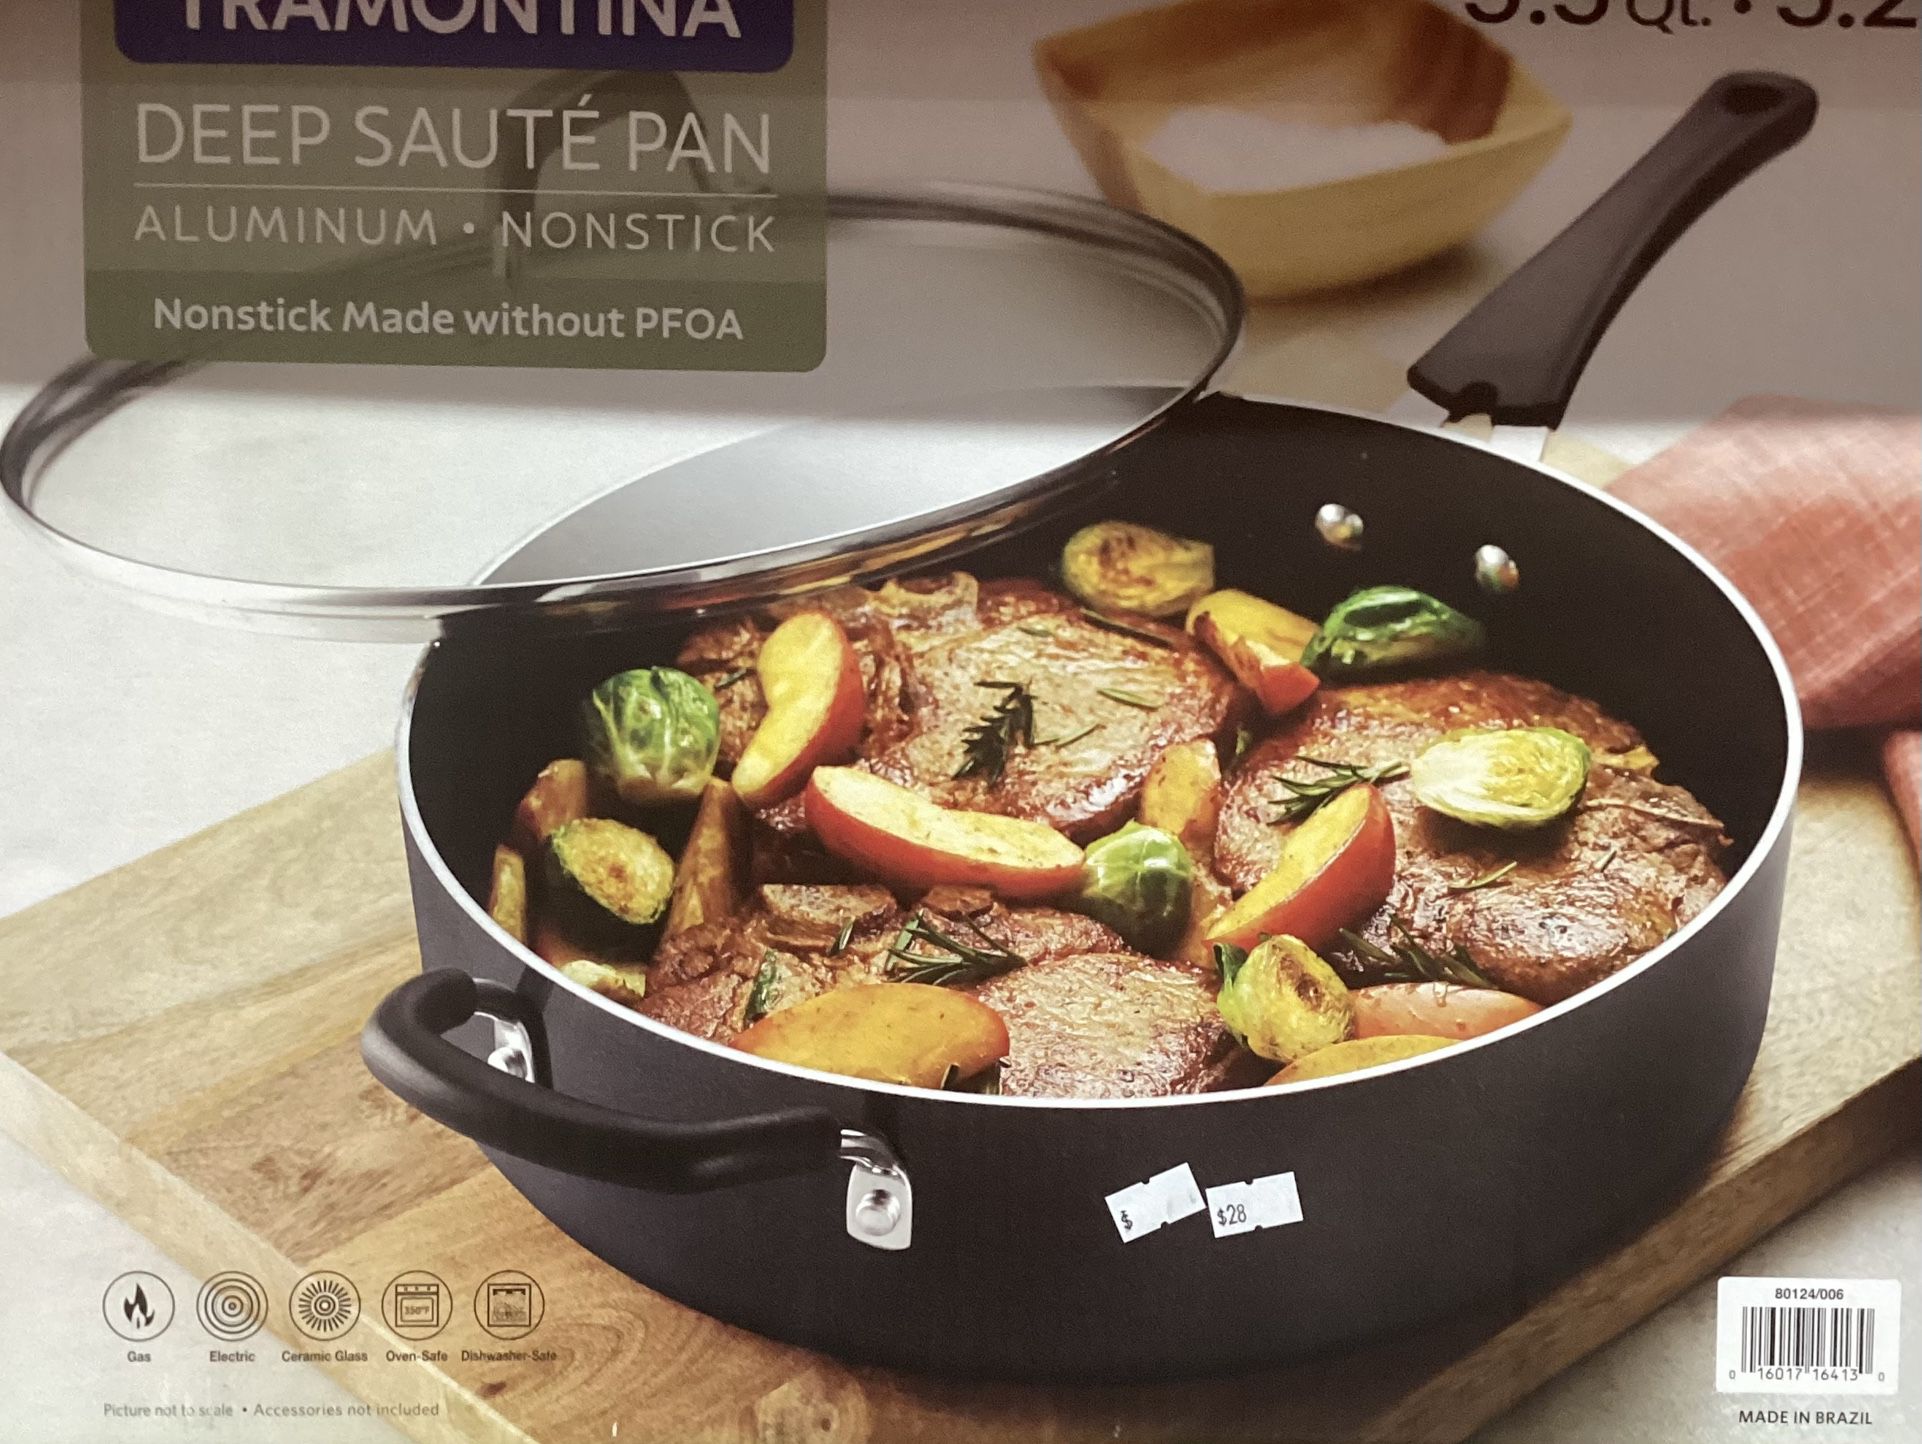 Tramontina All in One Plus Pan, 5 Qt Ceramic Non Stick (Charcoal Gray and  Blue) for Sale in Azalea Park, FL - OfferUp